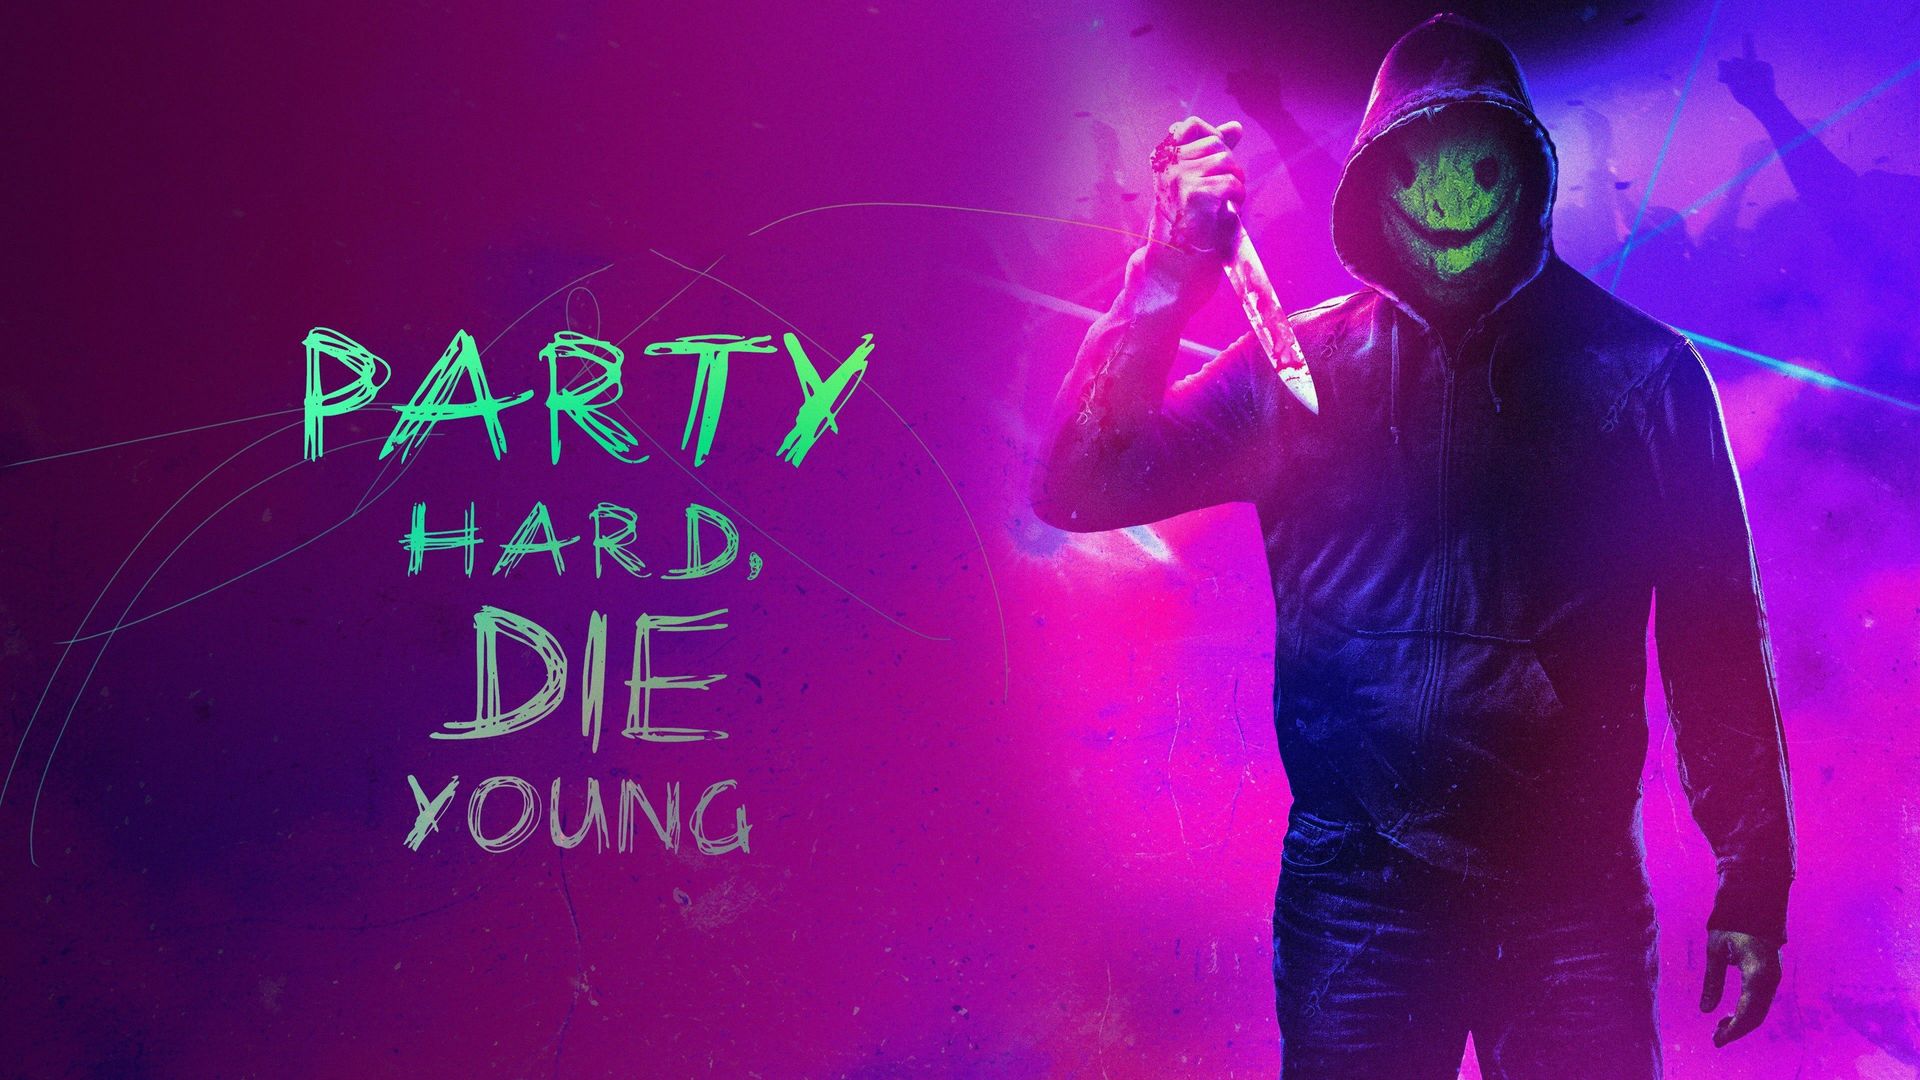 Party Hard Die Young Backdrop